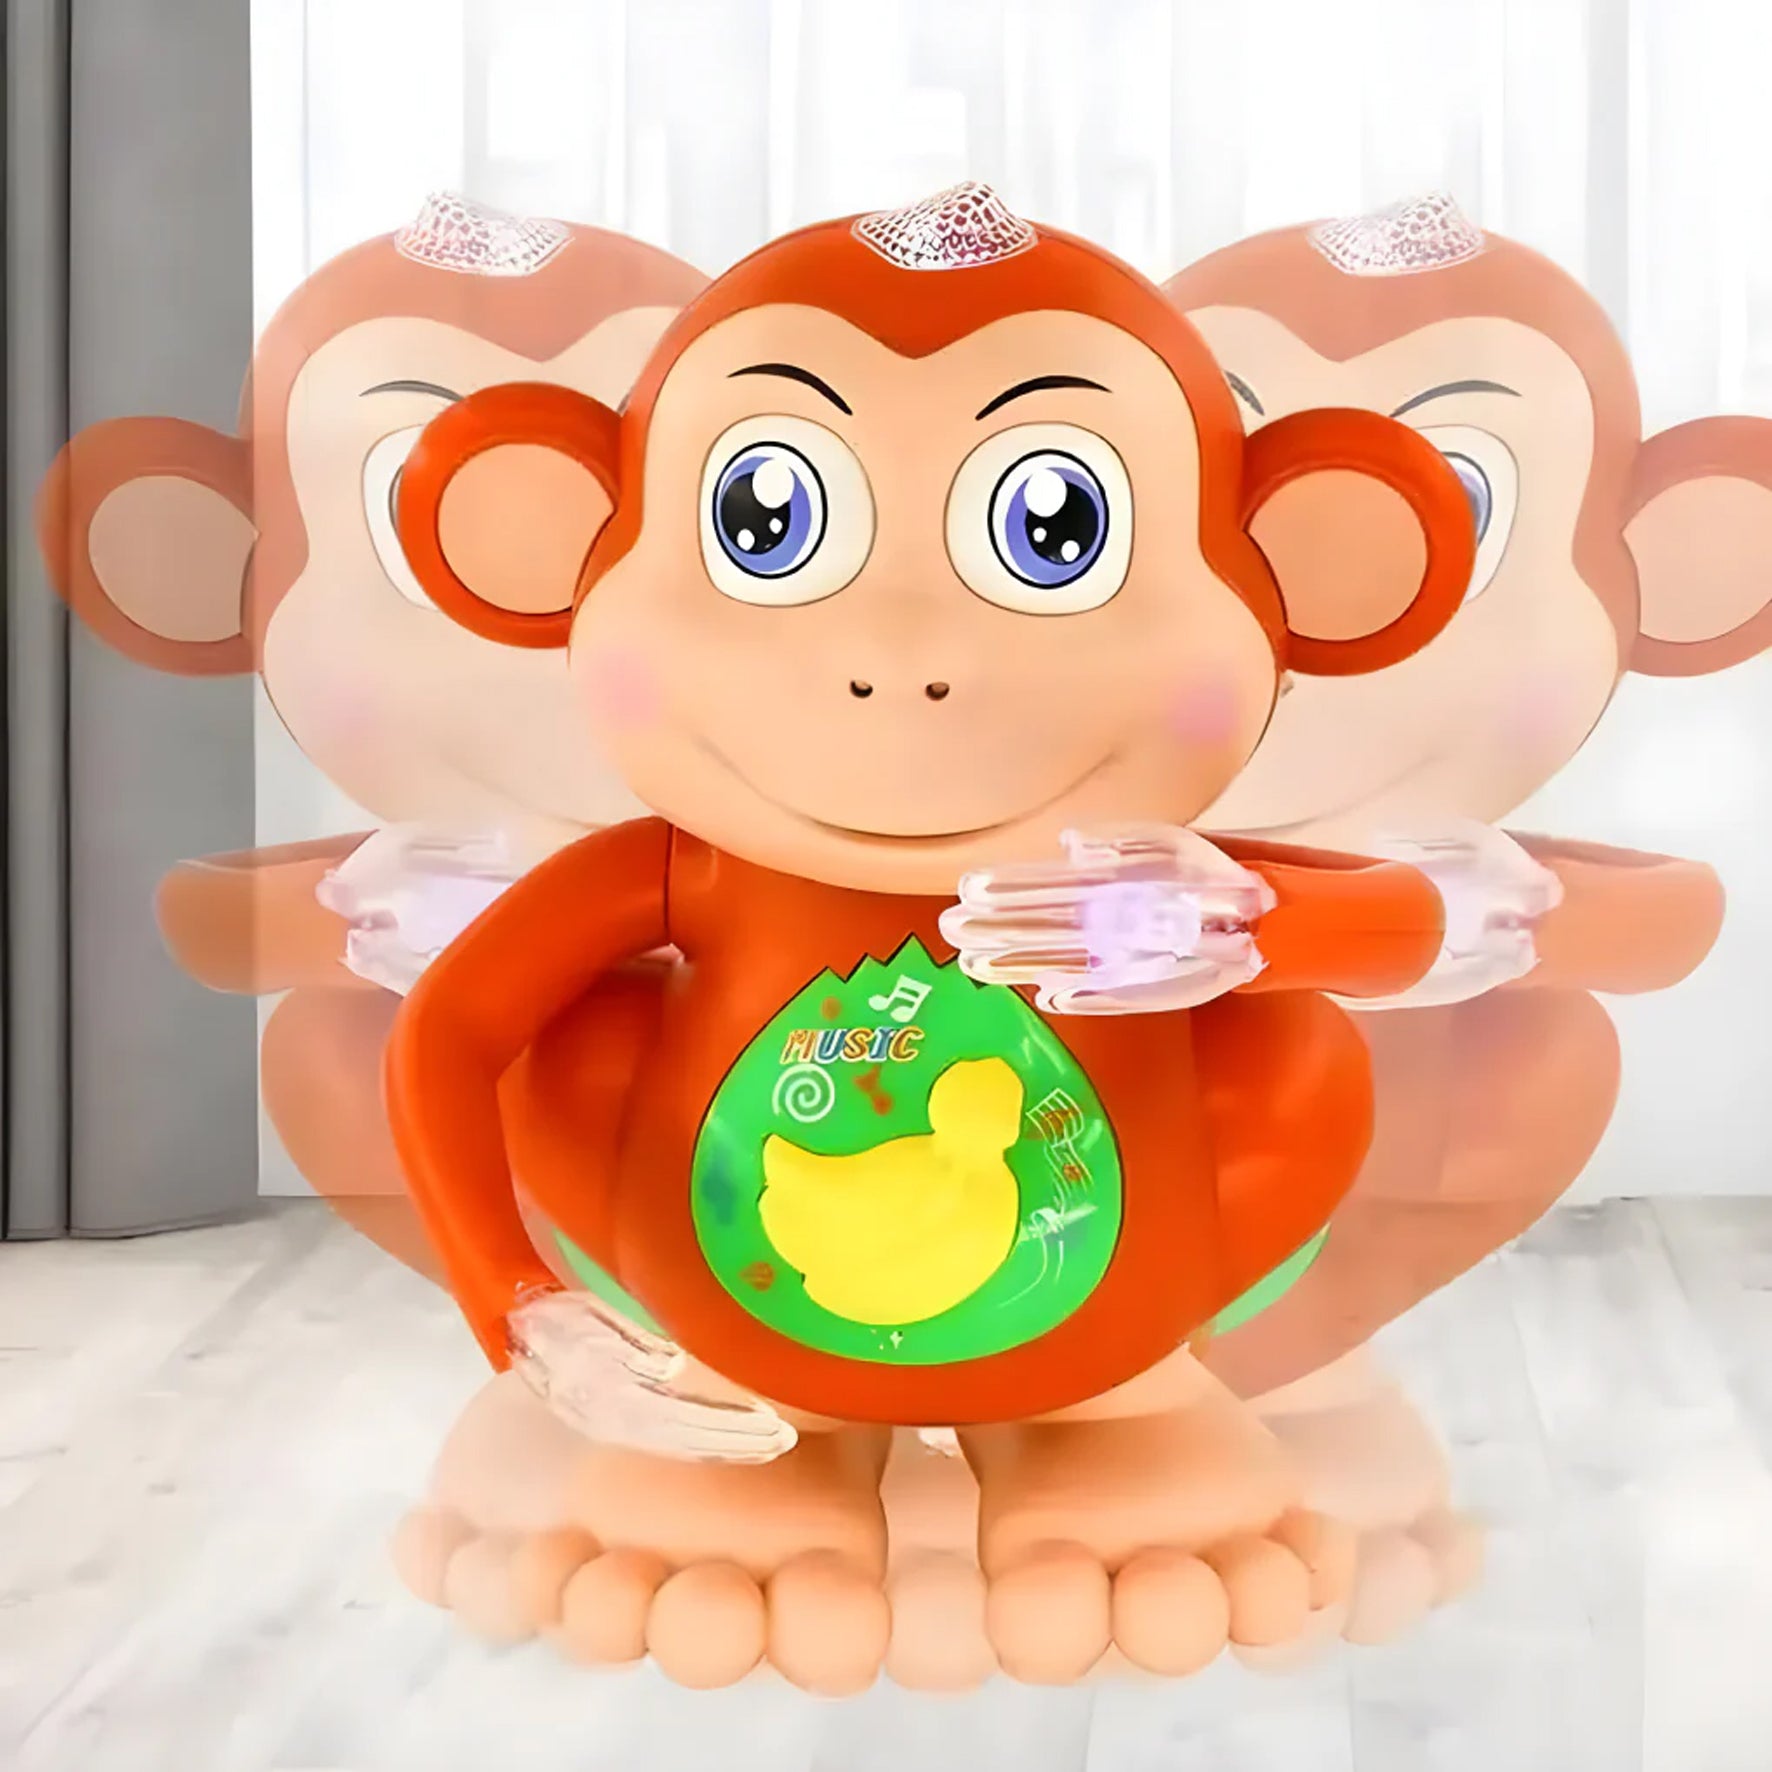 Dancing Monkey Musical Toy with Light, Music, and Battery Operated - Fun and Educational Toy for Toddlers